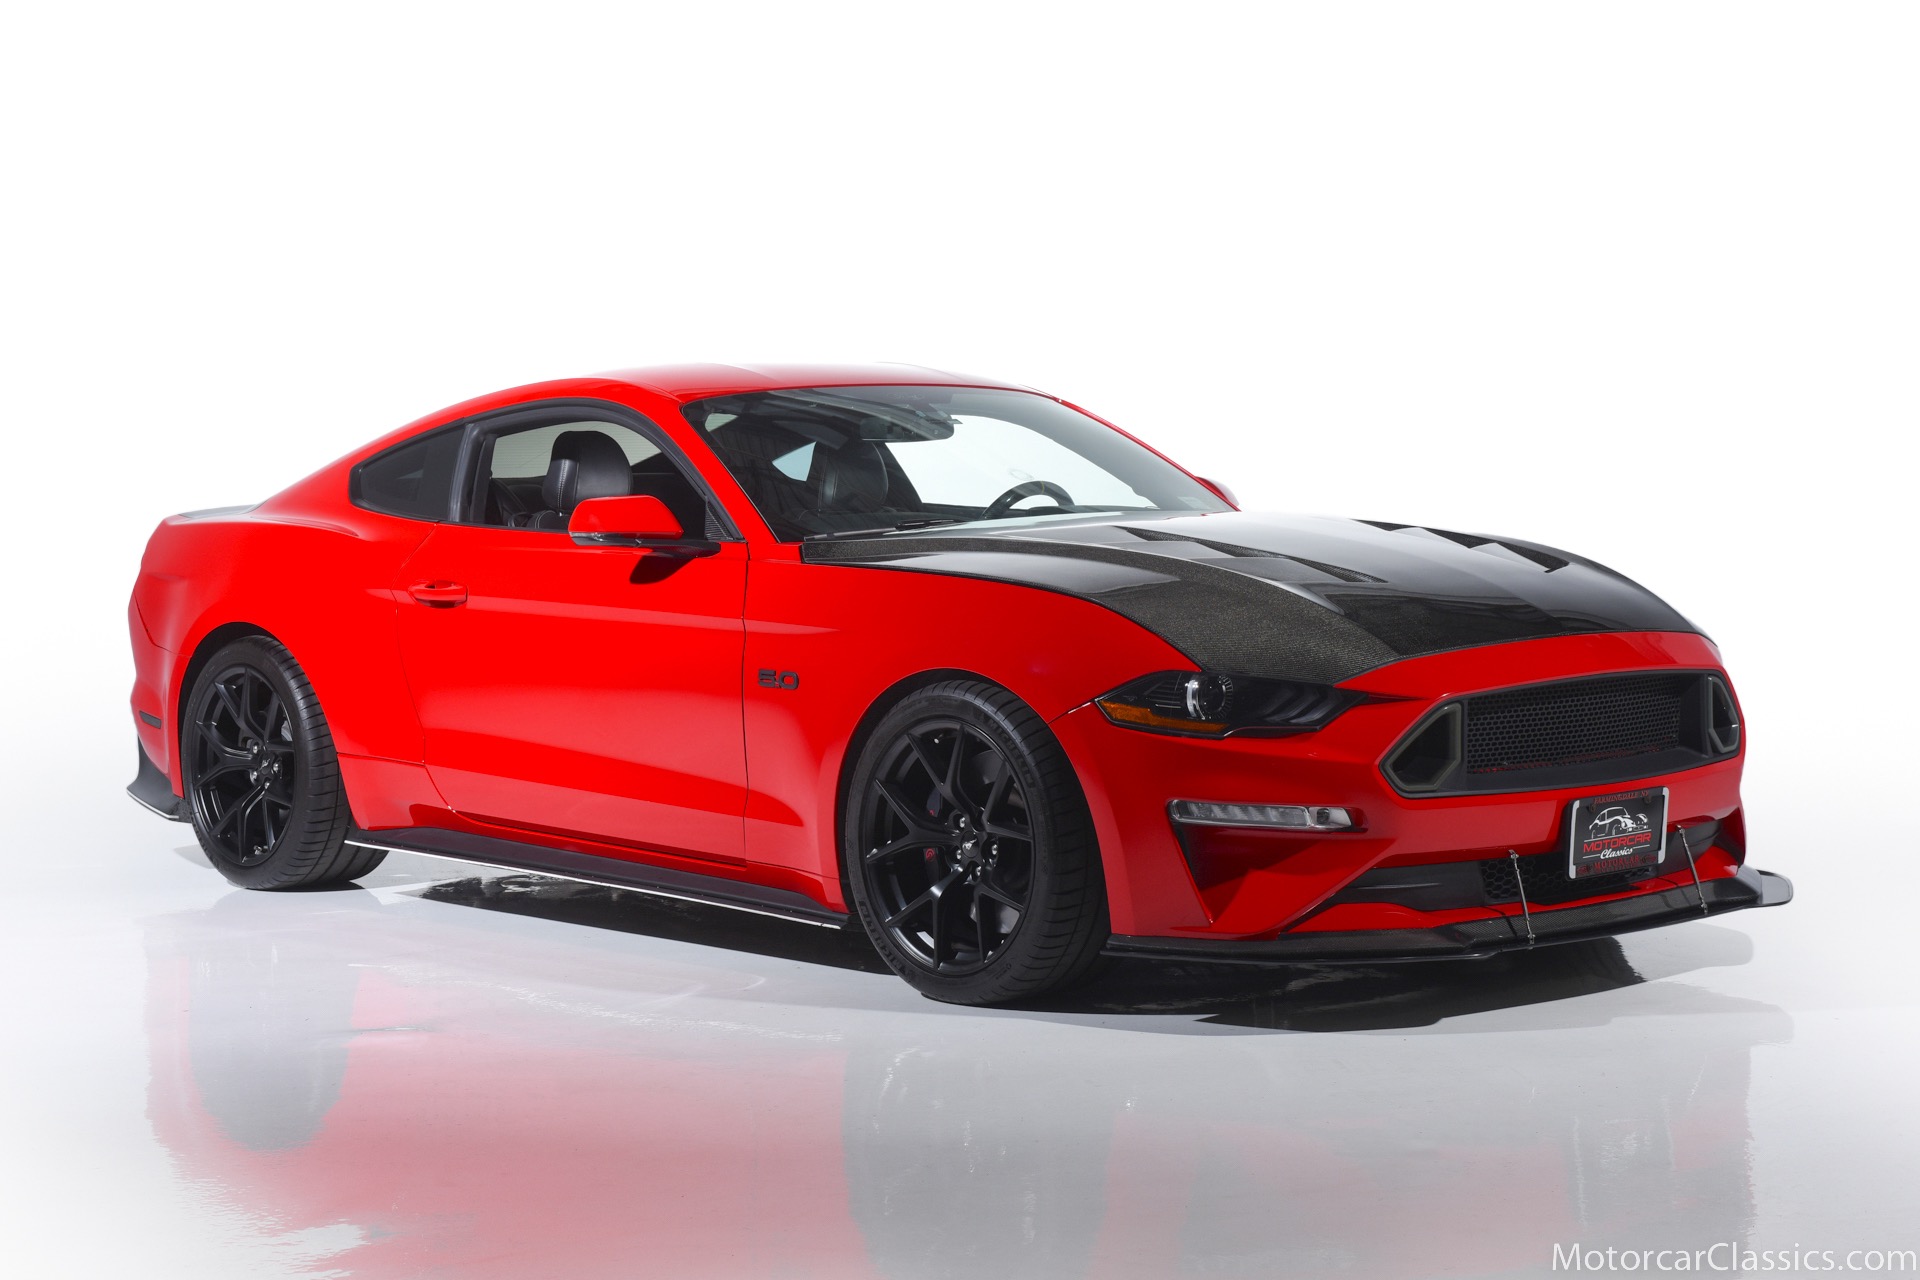 Used 2019 Ford Mustang GT Premium For Sale ($46,900) | Motorcar